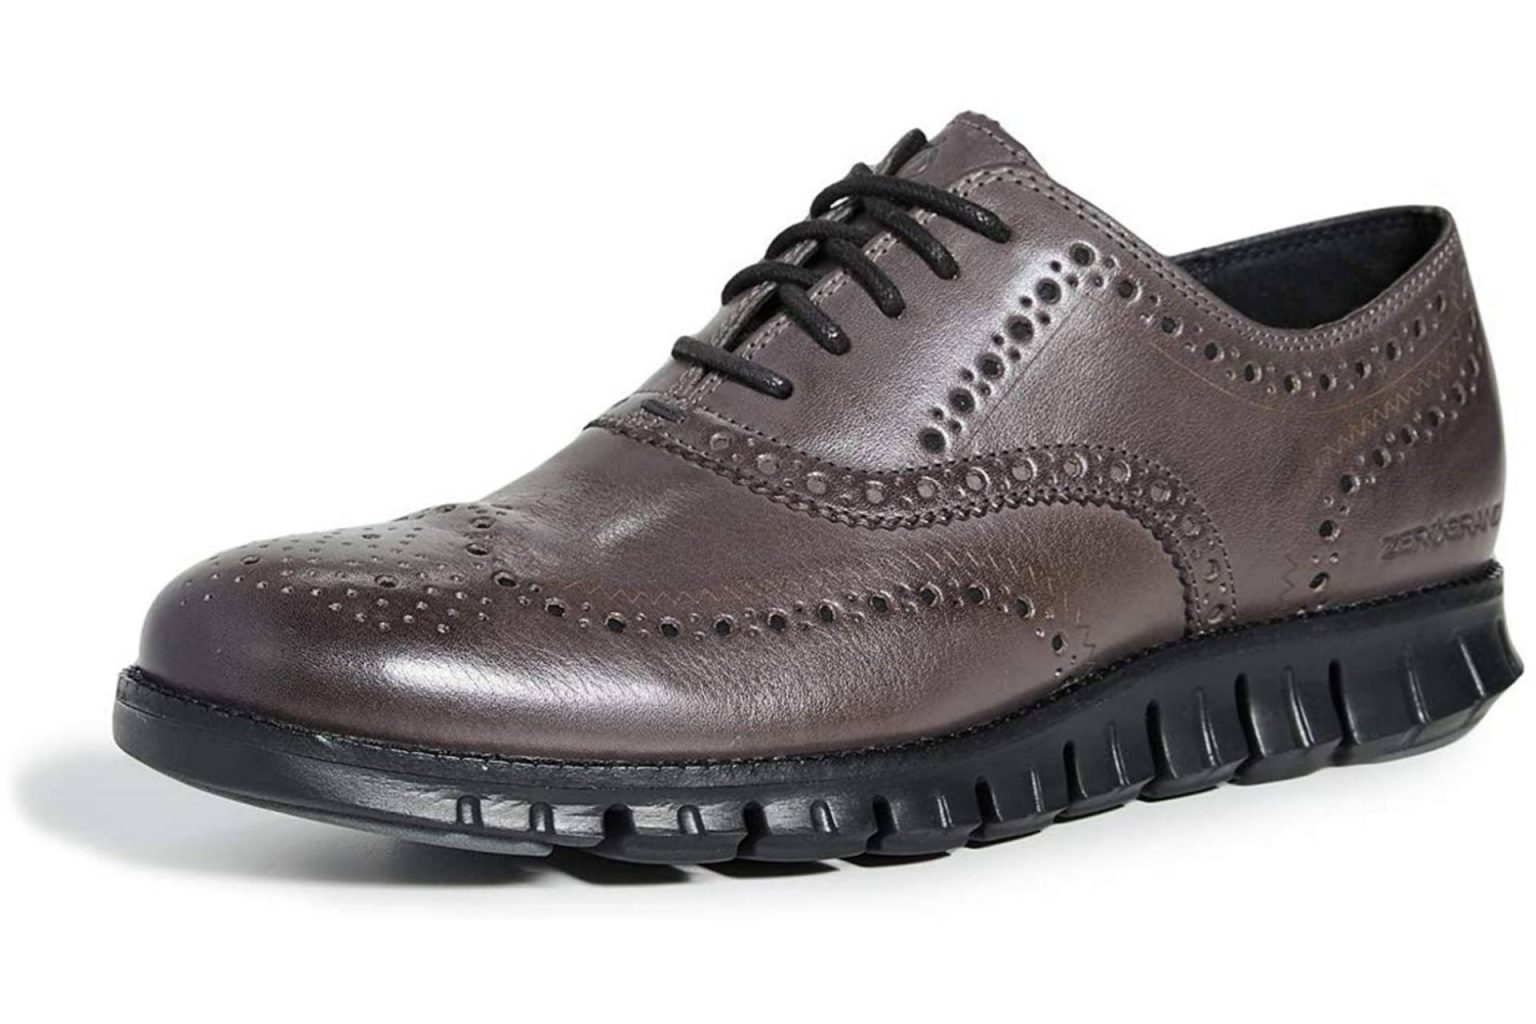 14 Best Men’s Work Oxford Shoes — Latest Review in 2023